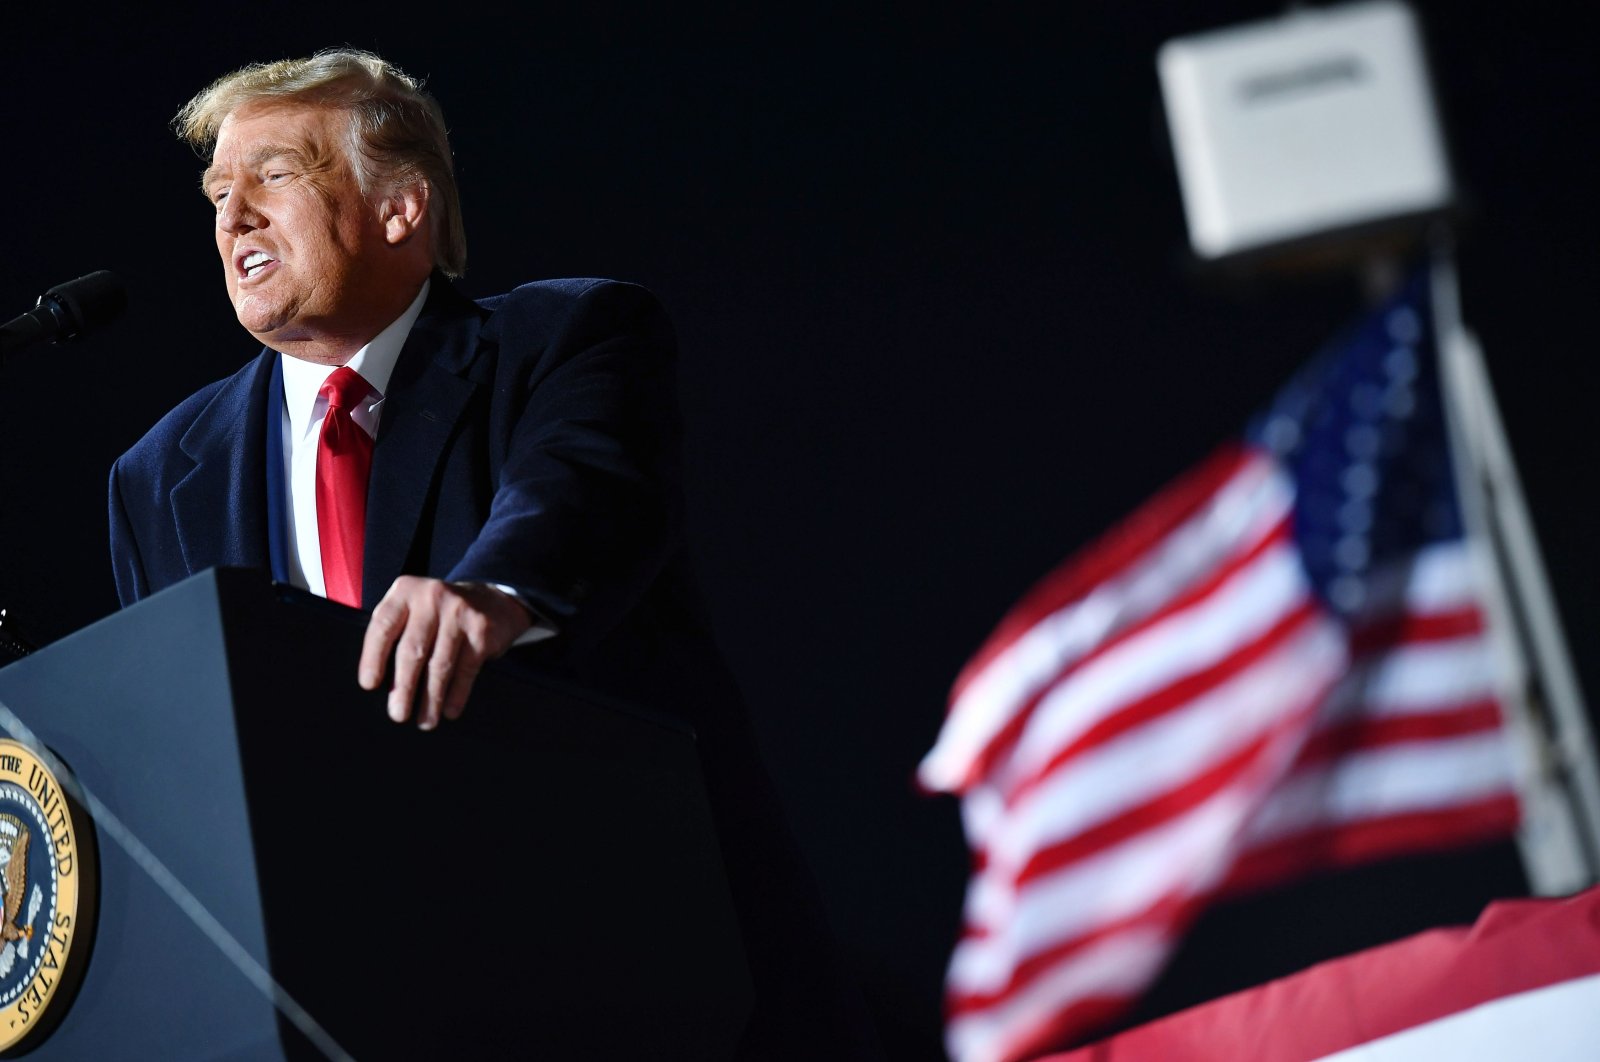 U.S. President Donald Trump speaks during a rally at Toledo Express Airport in Swanton, Ohio on September 21, 2020. (AFP Photo)